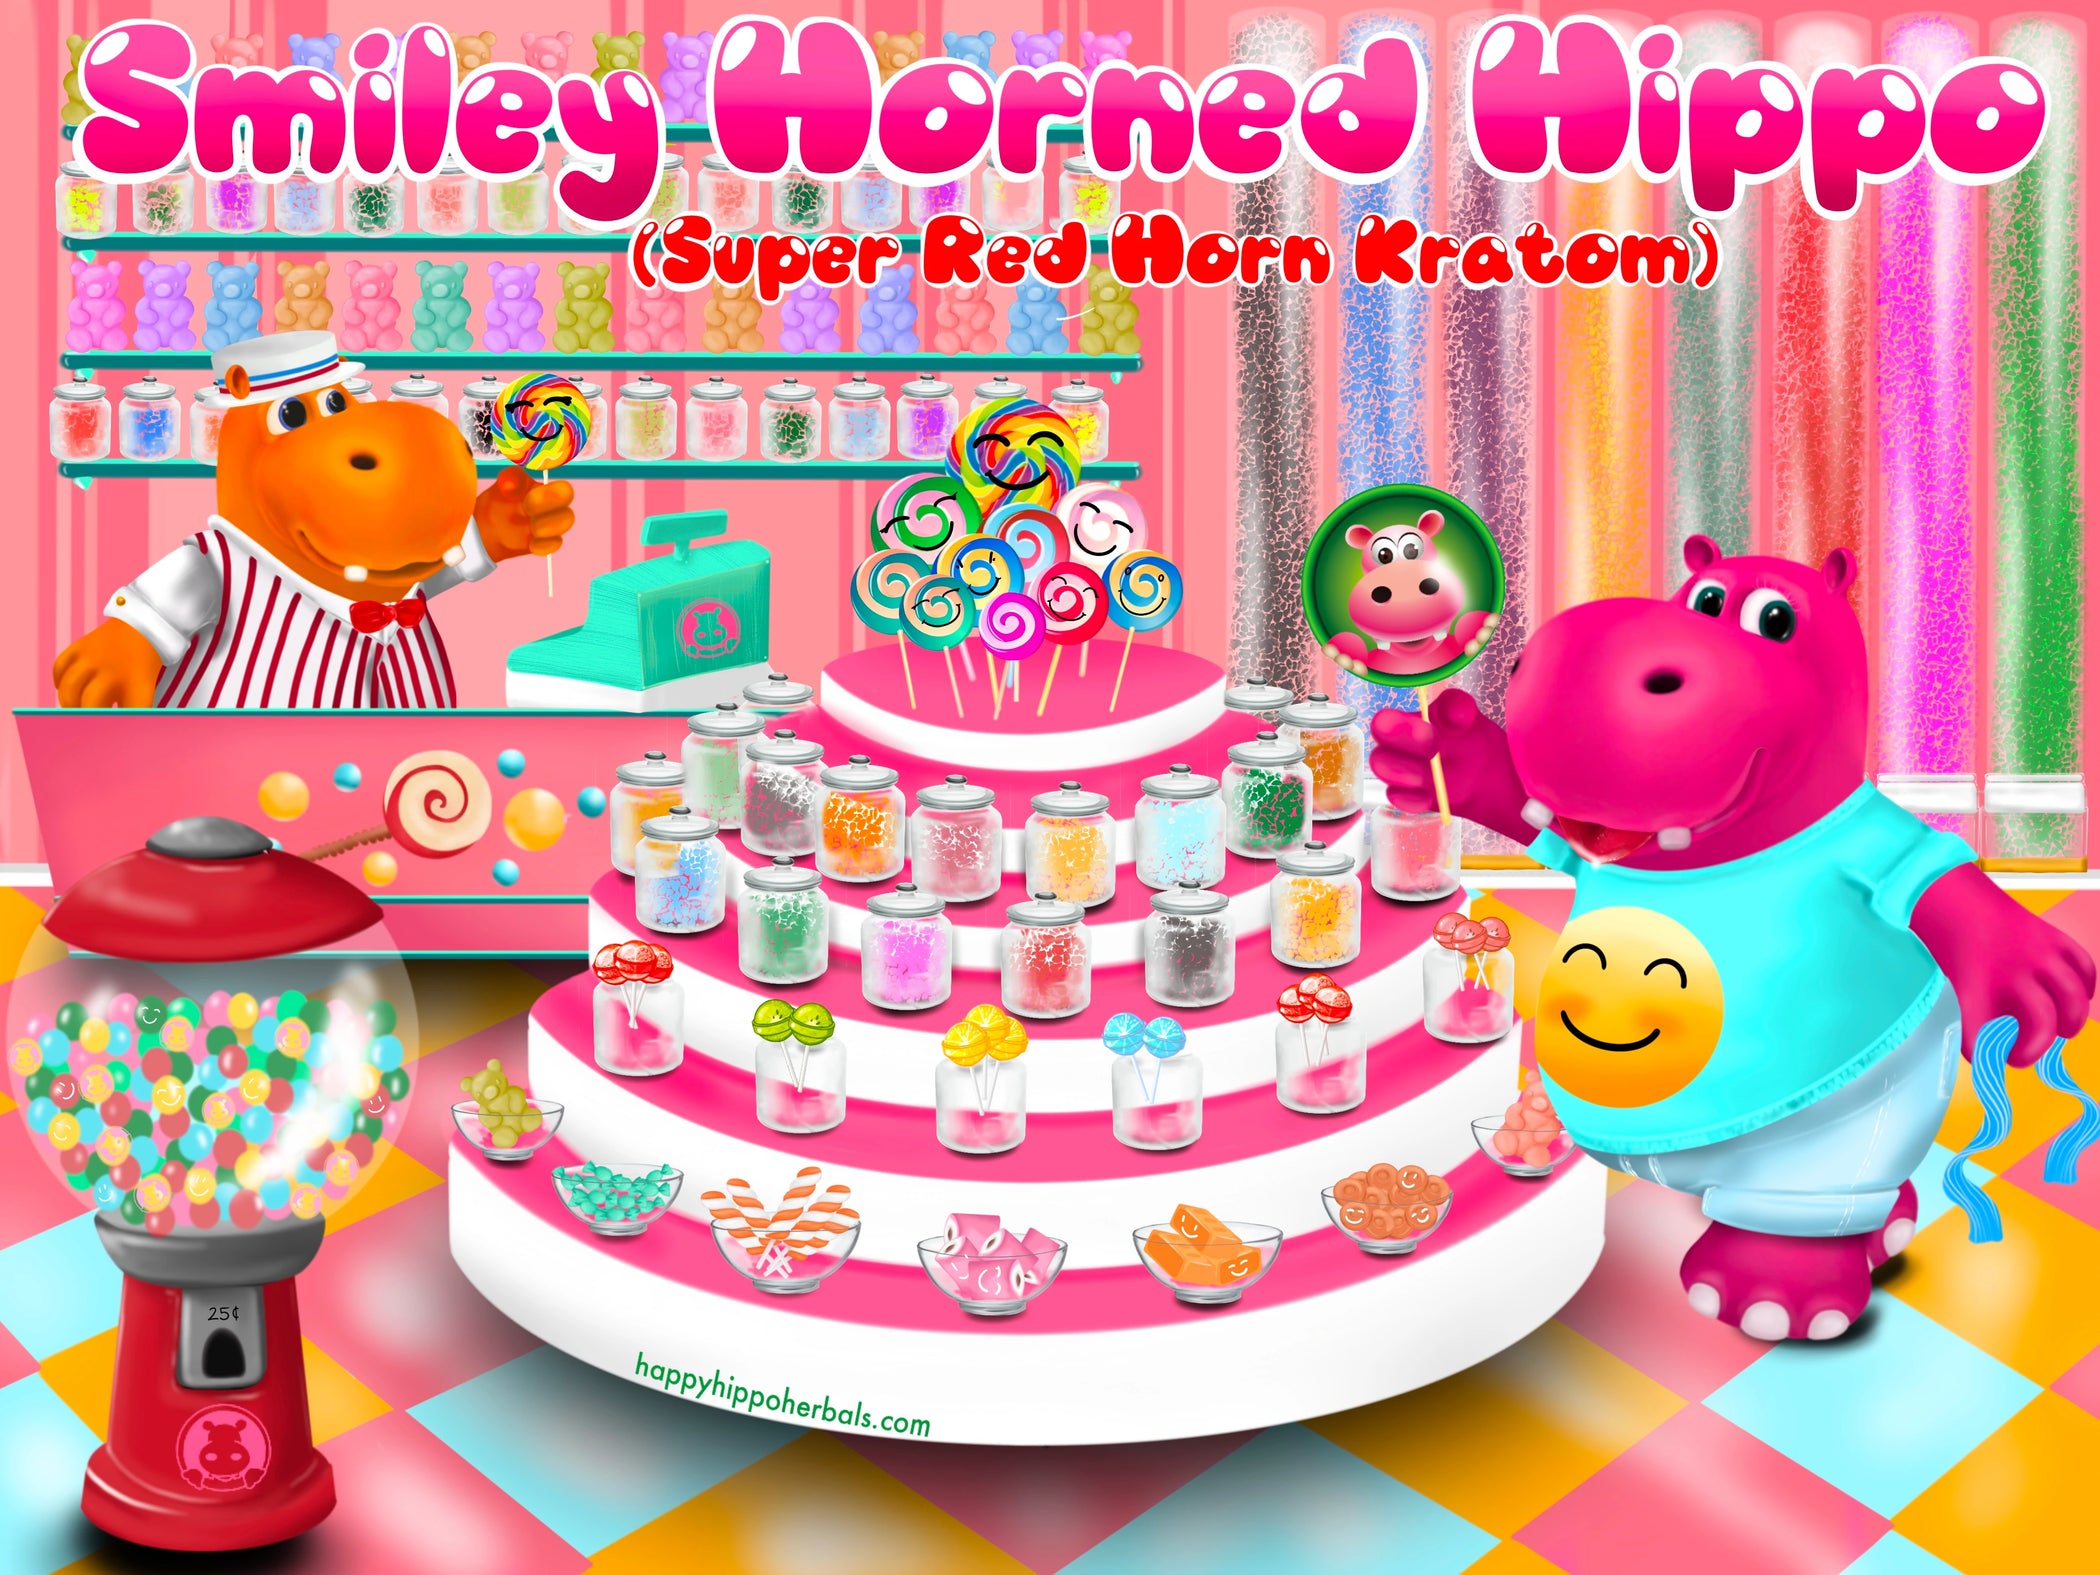 Graphic Designed image depicting Puddles the Hippo in a candy shop, selecting a Happy Hippo brand product, while using red horn kratom powder (Smiley Horned Hippo) 